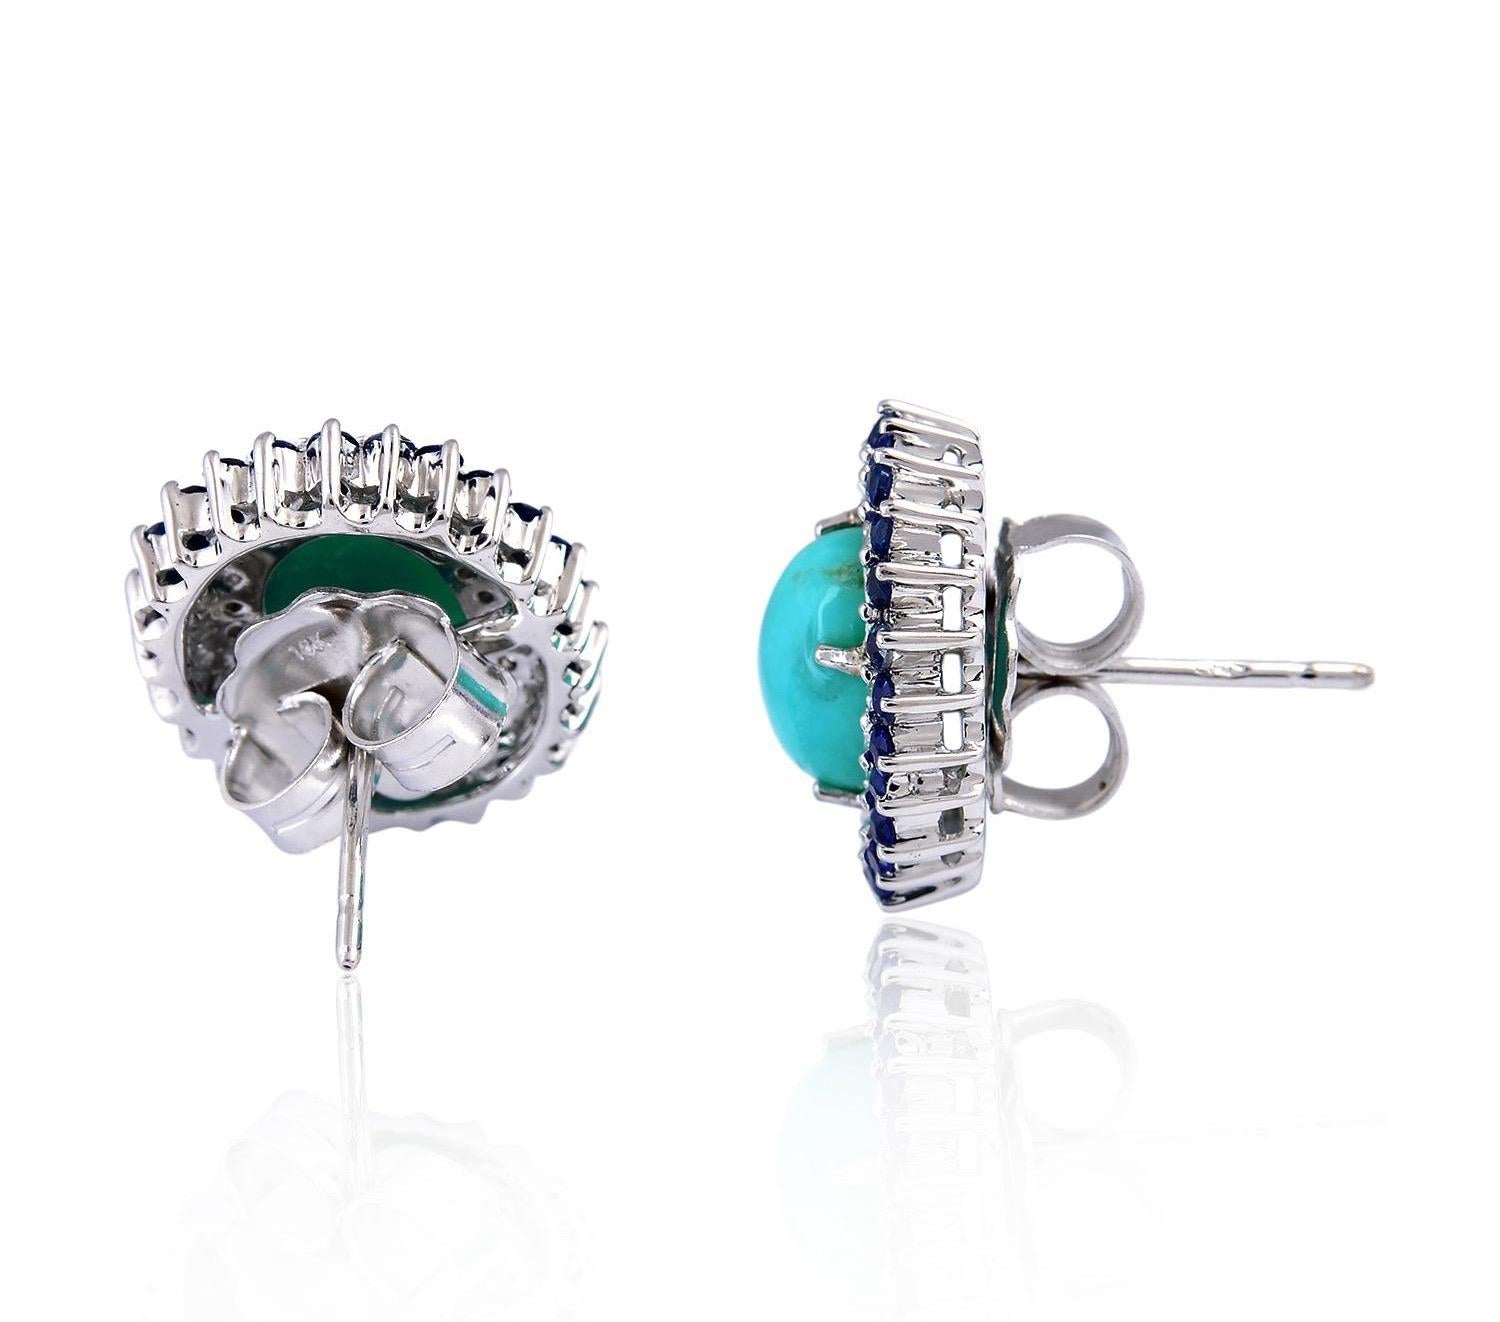 Cast from 14-karat gold and sterling silver, these studs earrings are hand set with 4.2 carats turquoise, .96 carats sapphire and .23 carats of shimmering diamonds.

FOLLOW MEGHNA JEWELS storefront to view the latest collection & exclusive pieces.